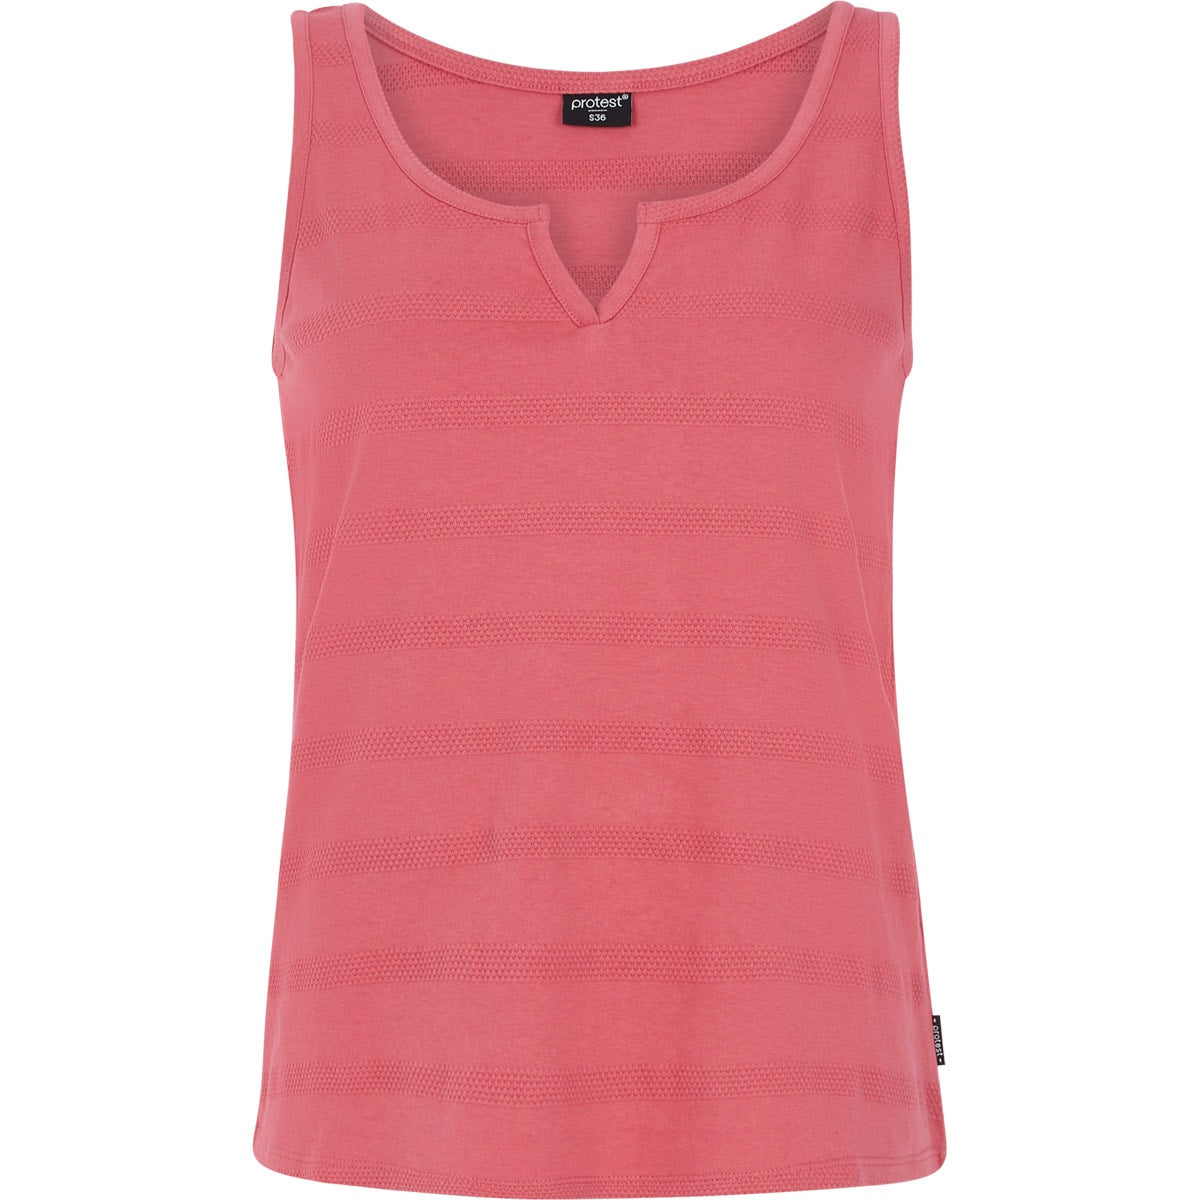 Protest Cadisa Vest Top in Smooth Pink